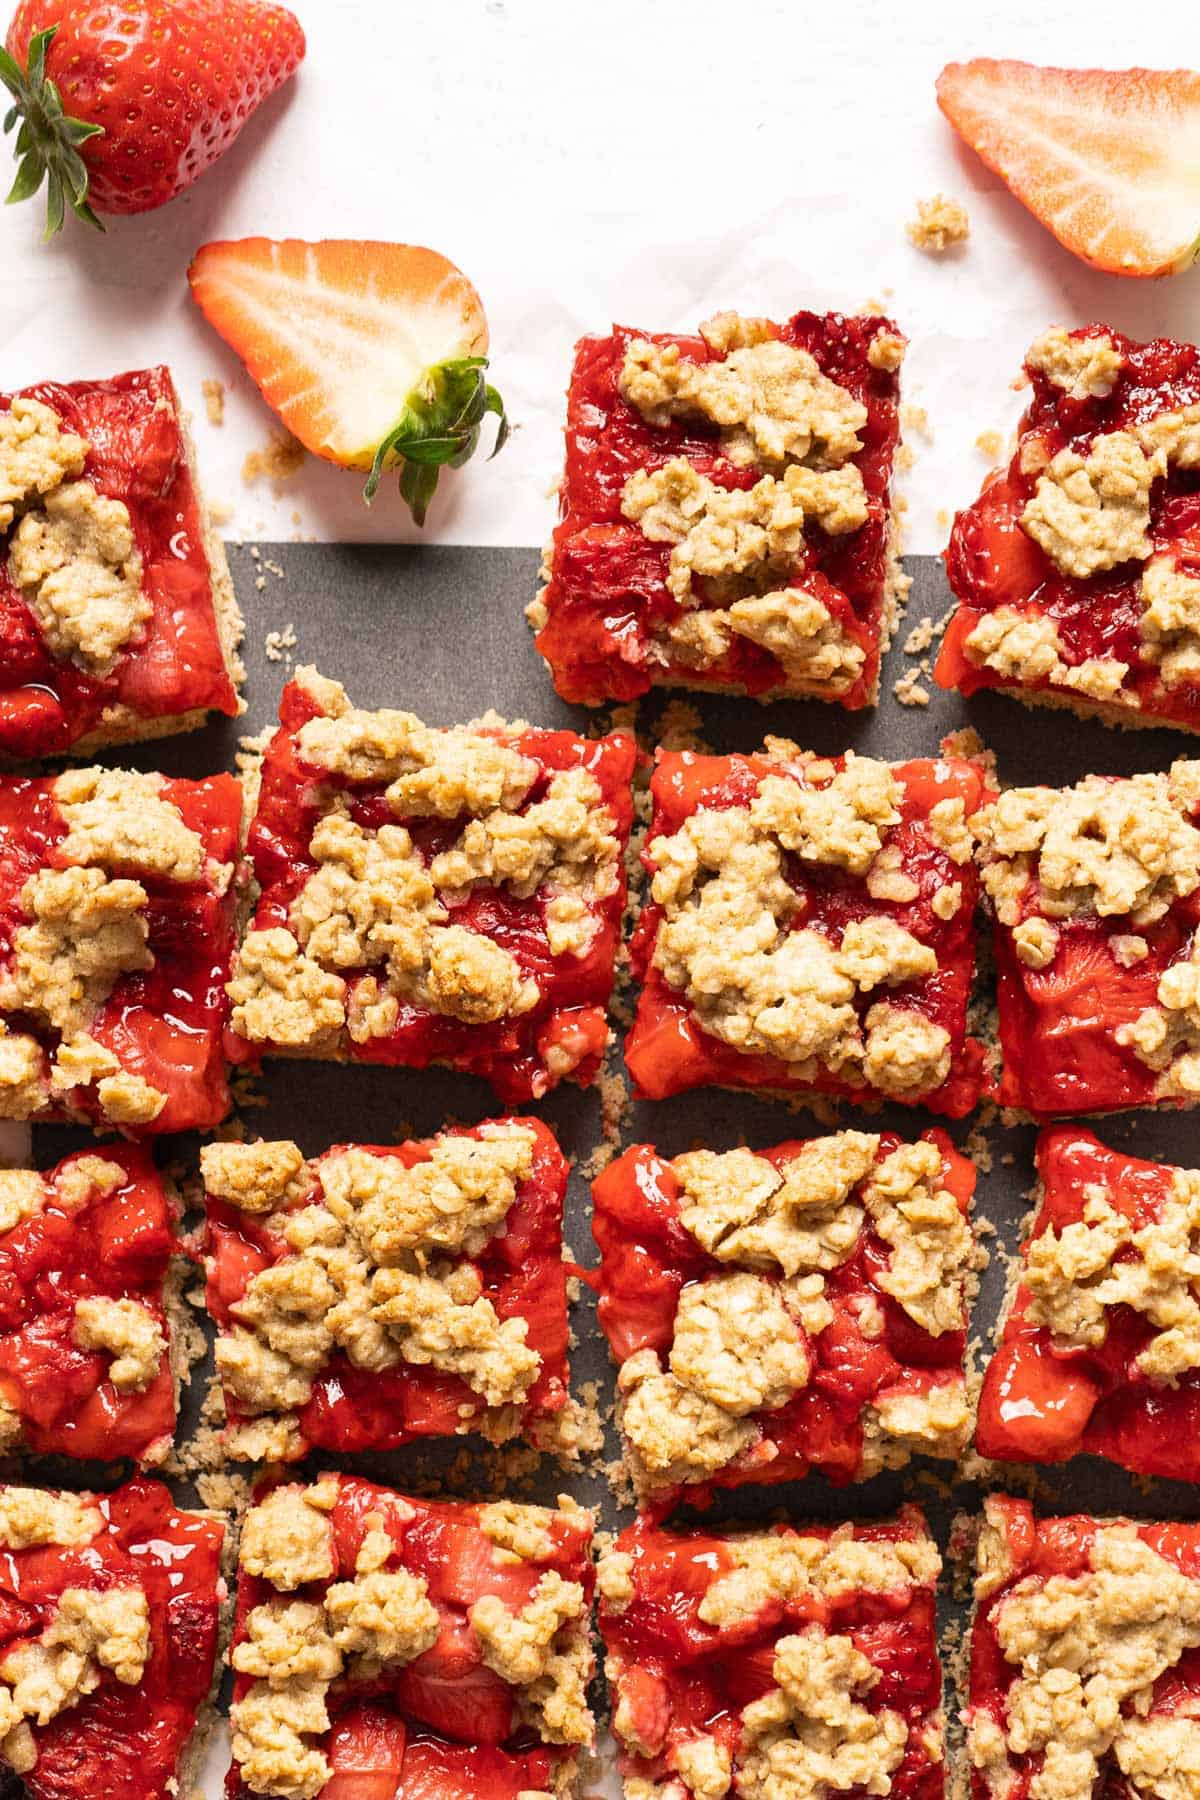 Sliced healthy strawberry oatmeal bars view from top.